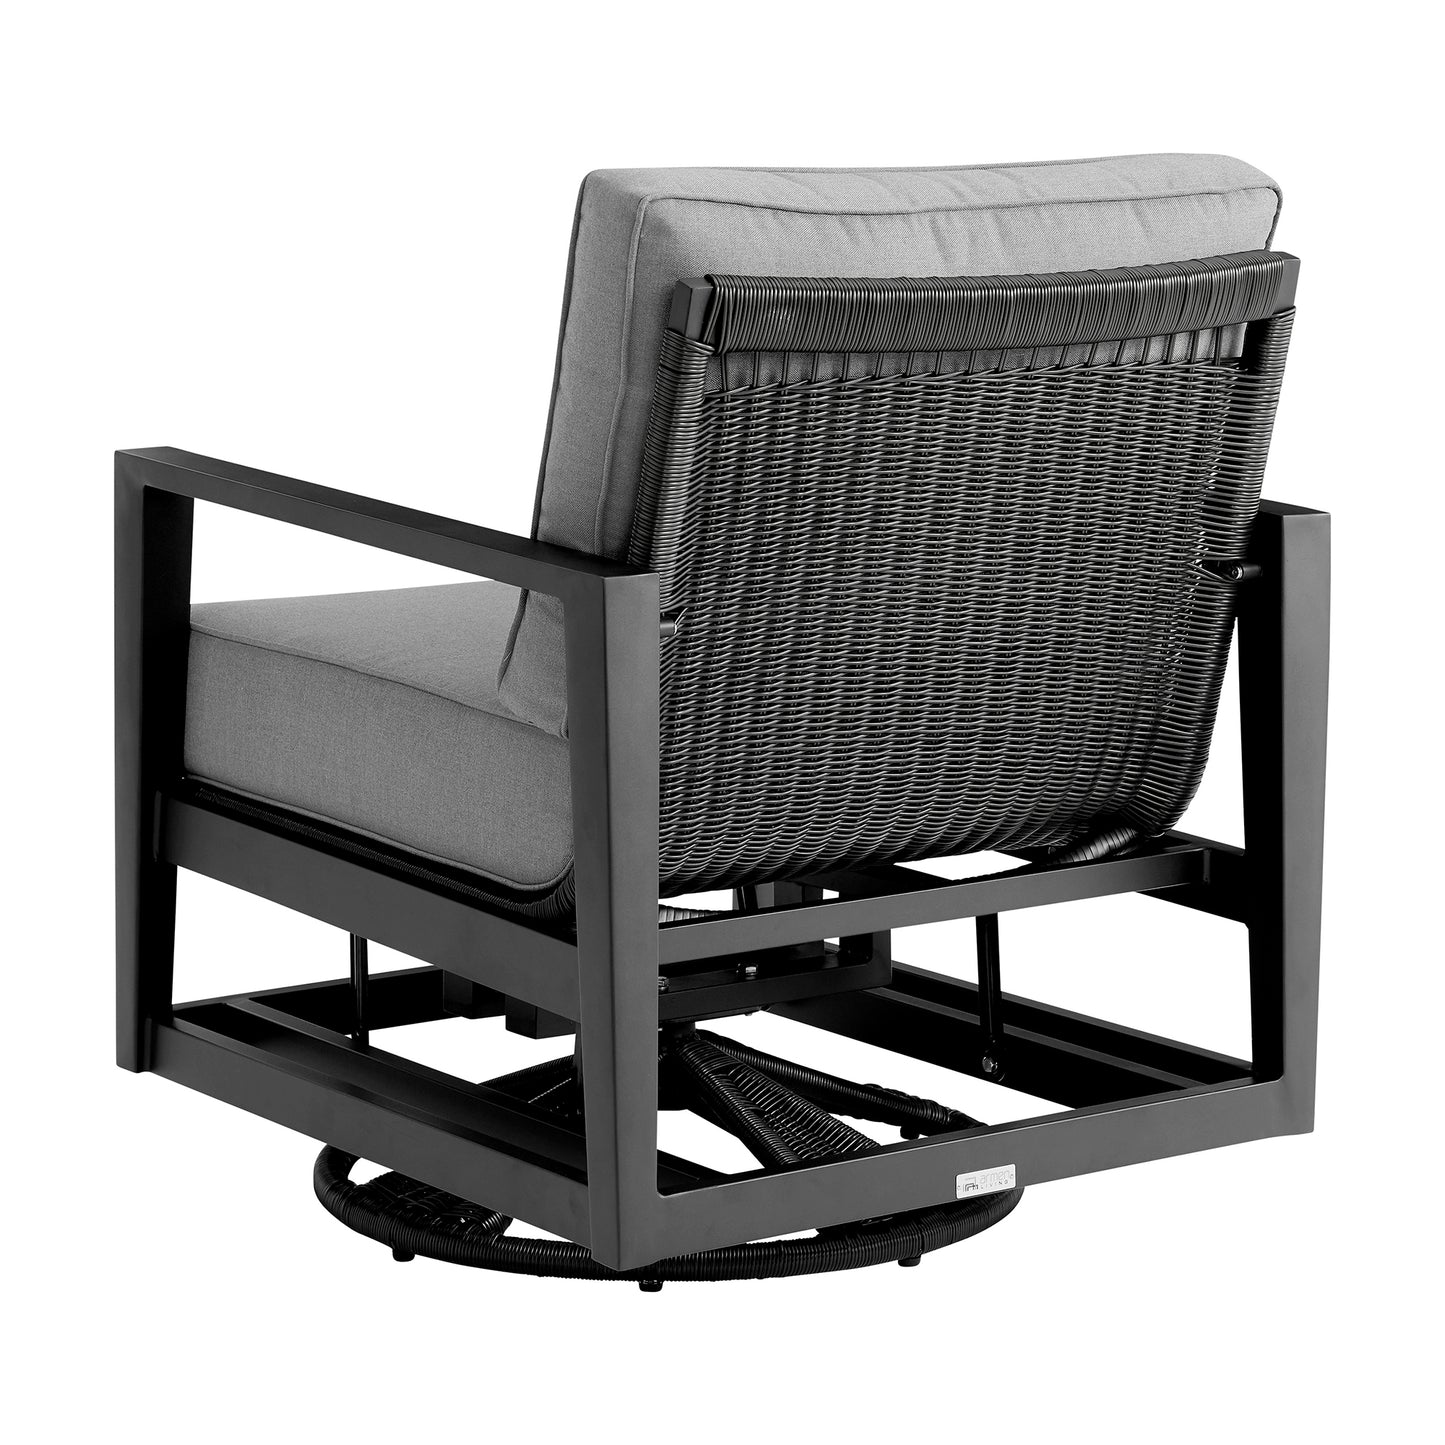 Cayman 3 Piece Black Aluminum Outdoor Seating Set with Dark Gray Cushions